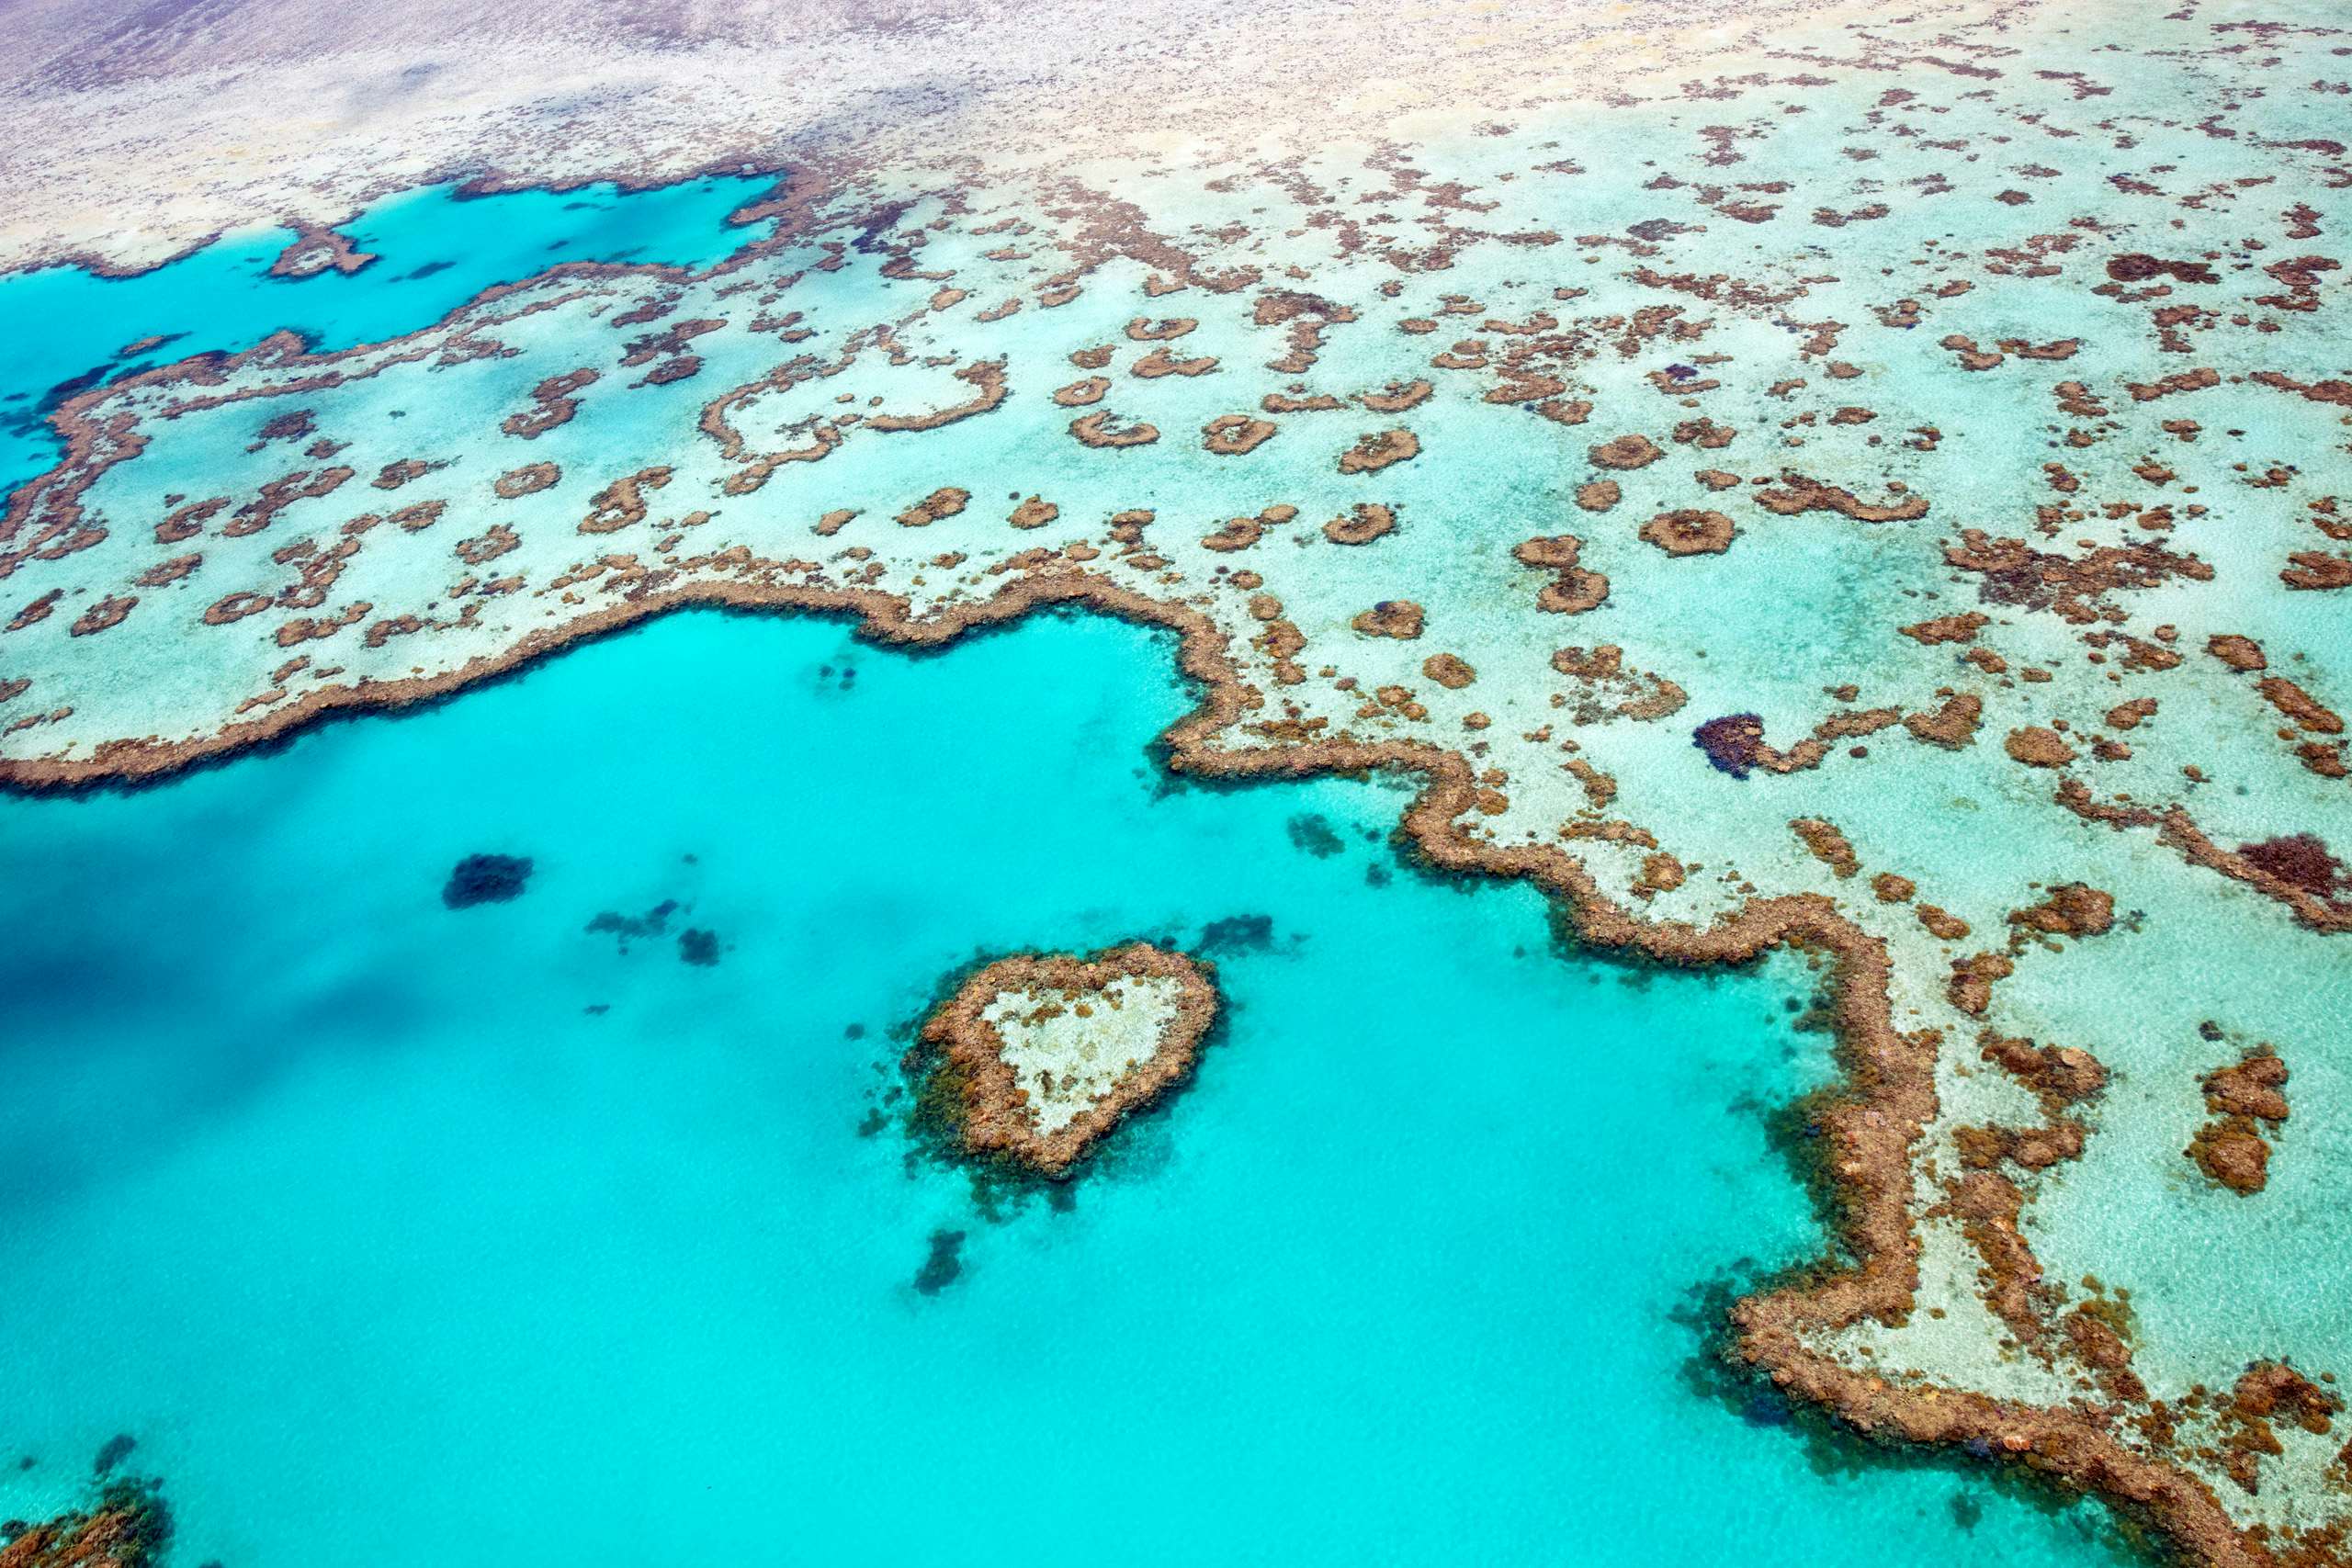 Aerial view of the Great Barrier Reef with a naturally heart-shaped coral formation.